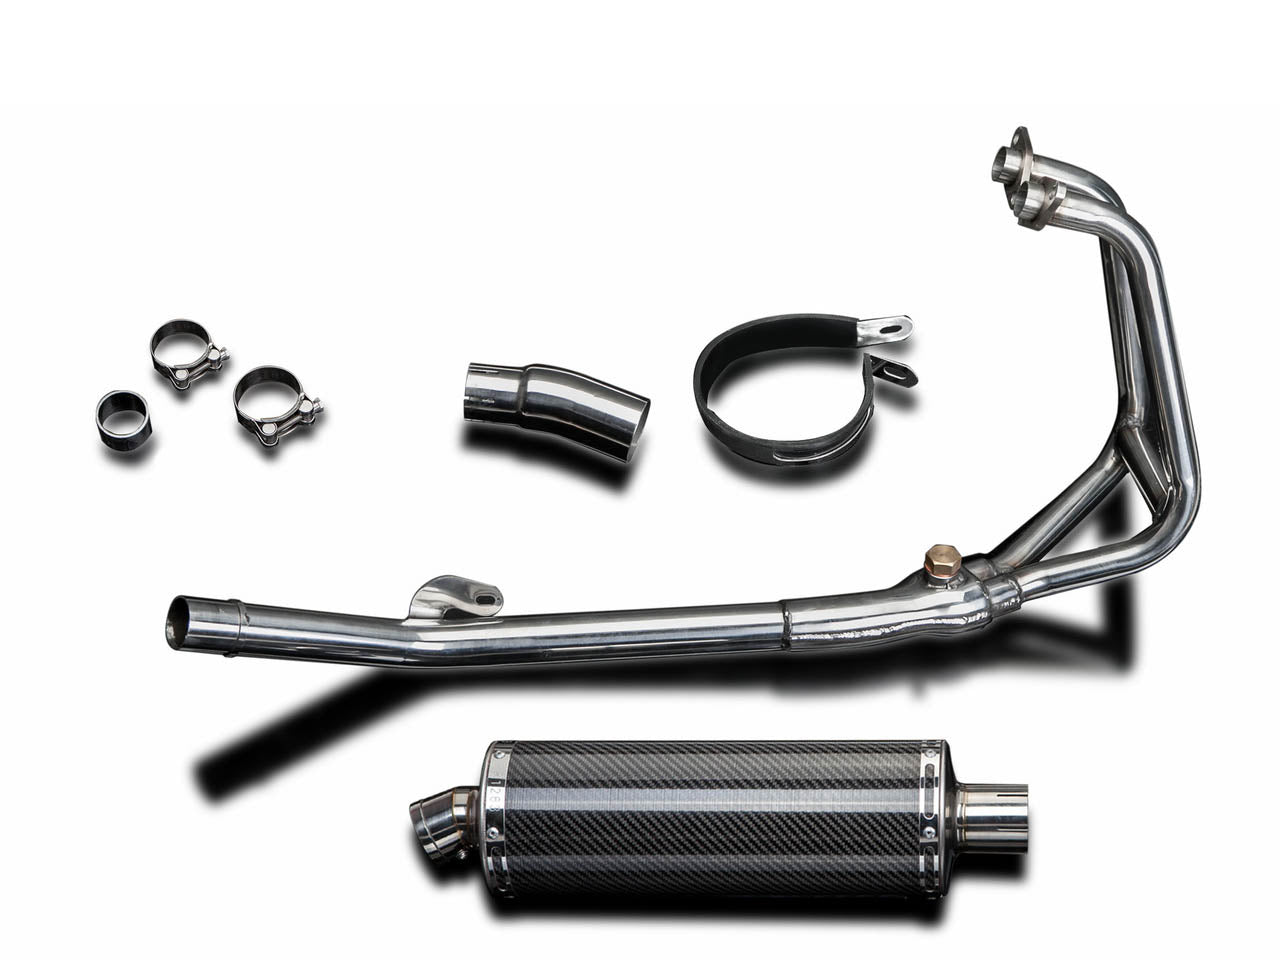 DELKEVIC Kawasaki Ninja 250R (11/13) Full Exhaust System with Stubby 14" Carbon Silencer